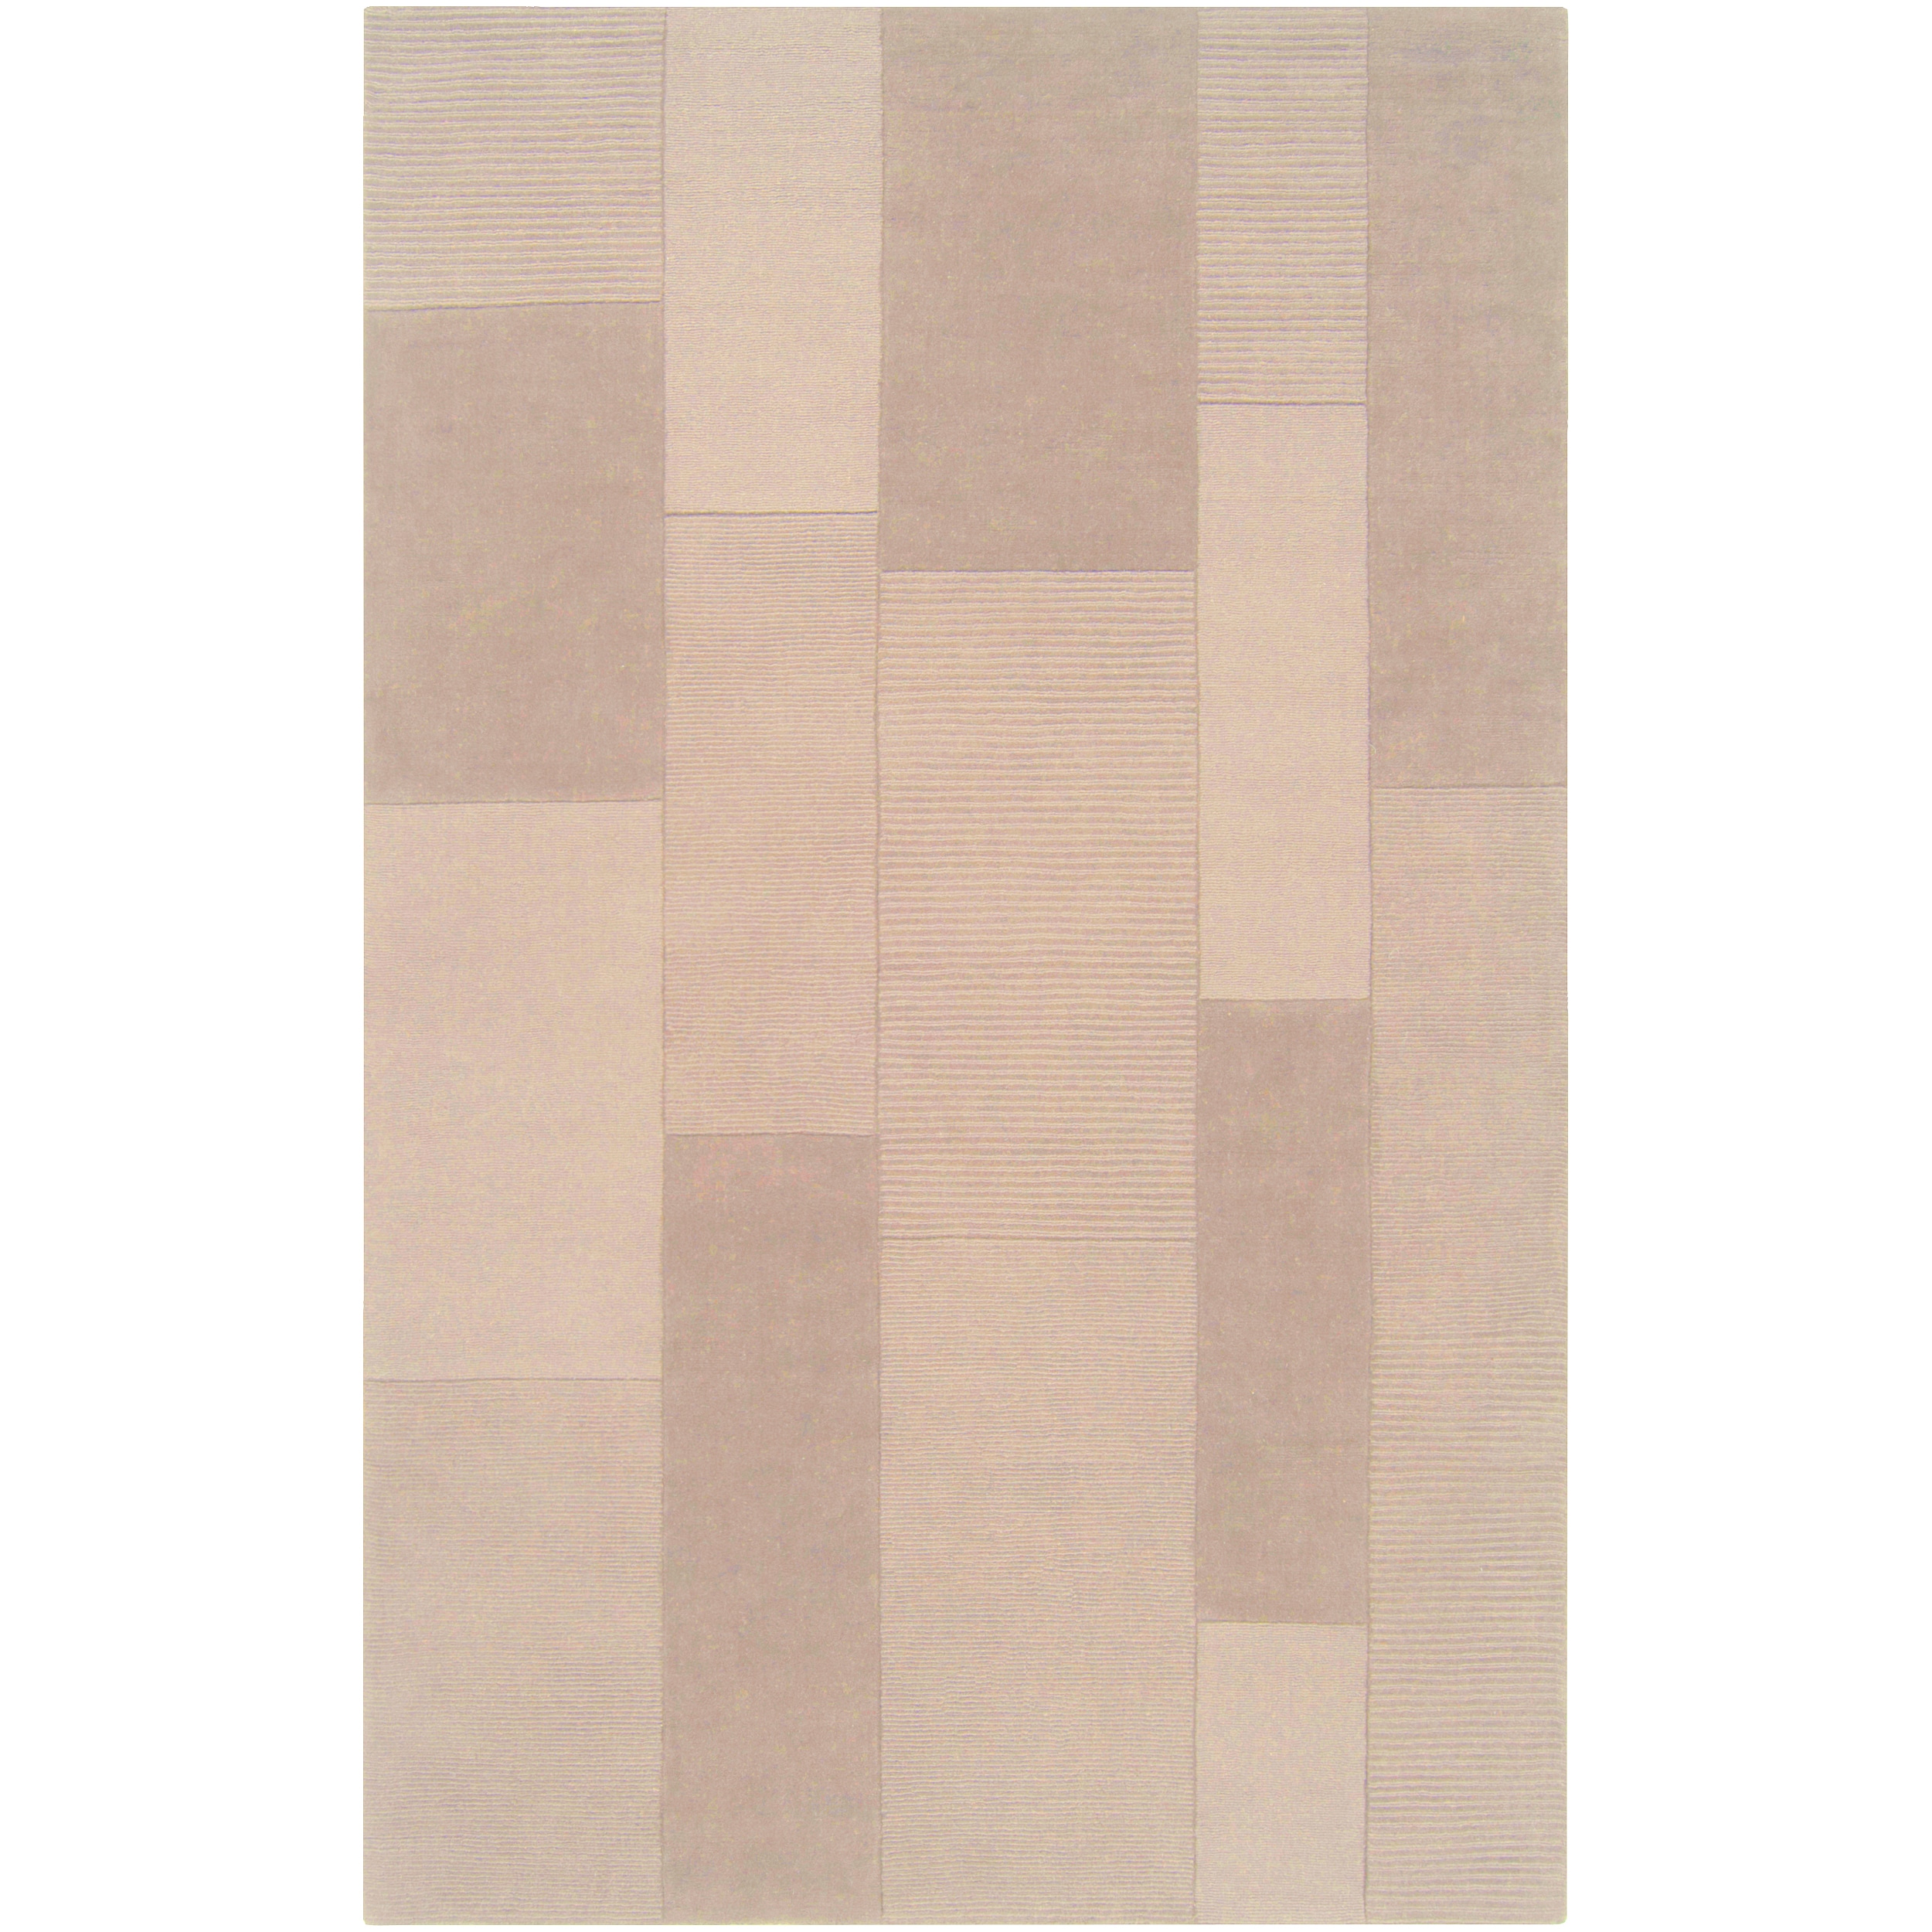 Hand crafted Solid Casual Beige Gateway Wool Rug (2 X 3)